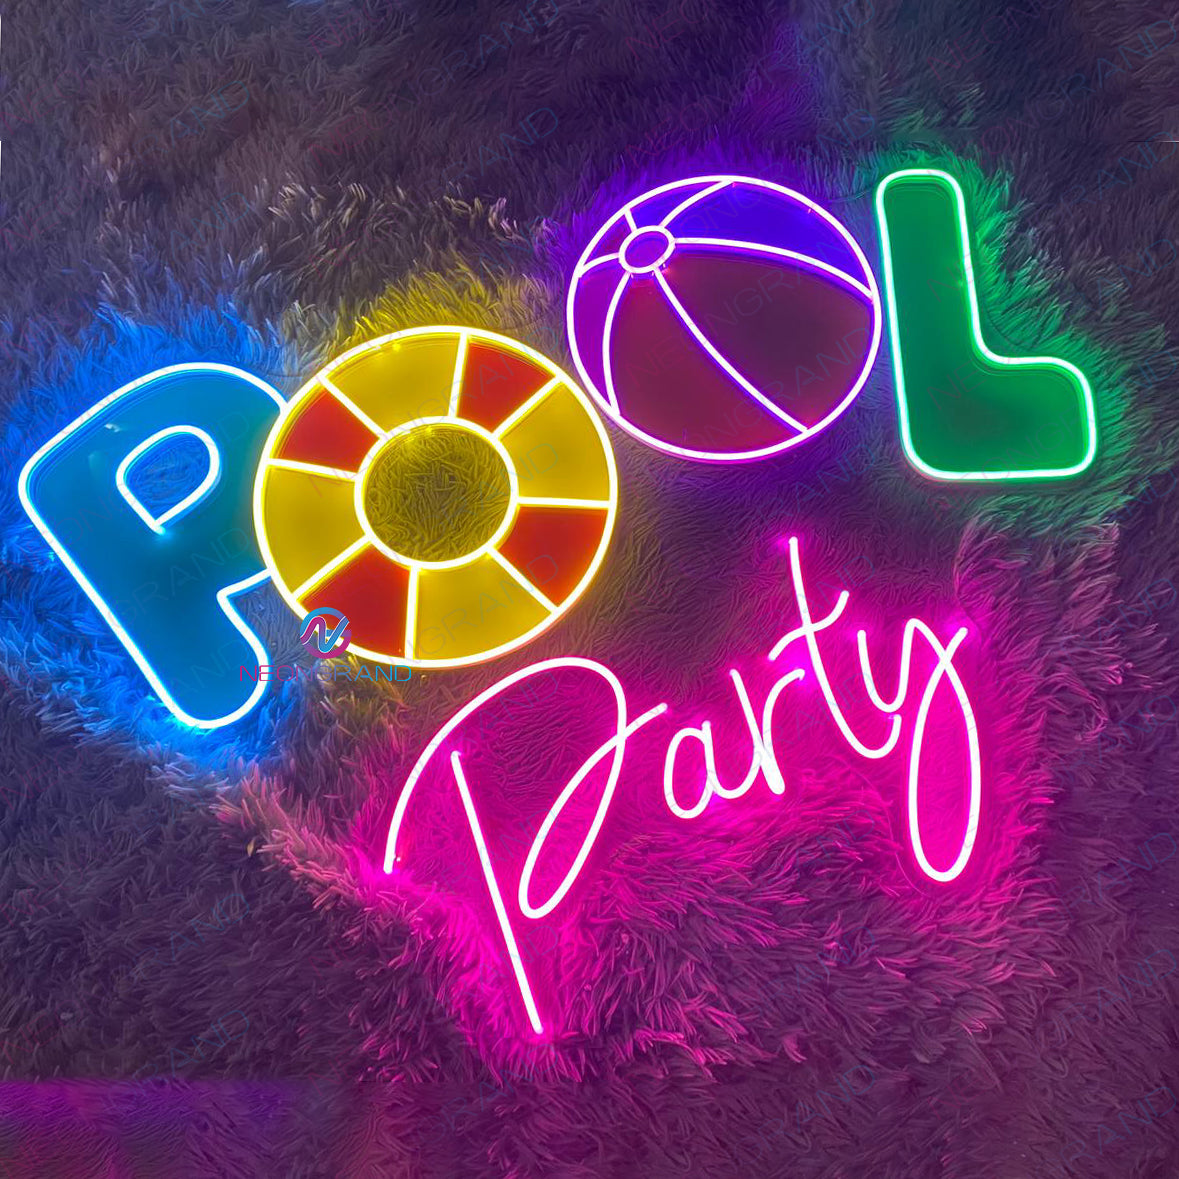 Pool Party Neon Sign Led Light